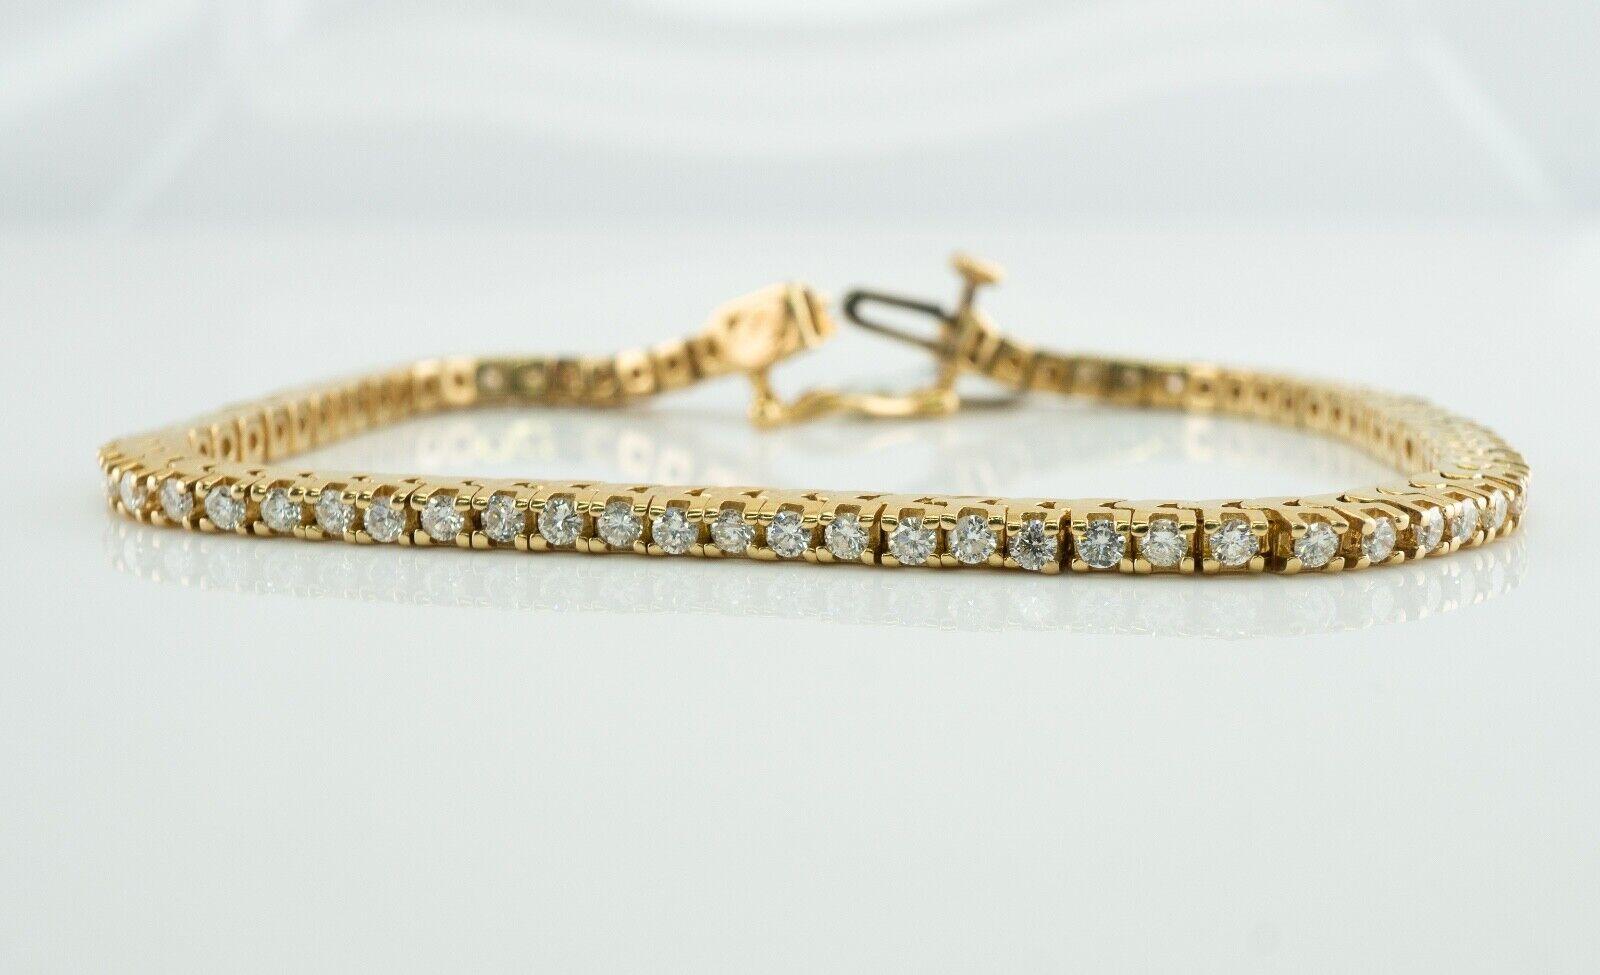 This amazing estate tennis bracelet was a part of an auction parcel. It is crafted in solid 14K Yellow gold and set with white and fiery round brilliant cut diamonds. There are 72 diamonds. The diamonds range from SI1 to SI2 clarity and H color. The